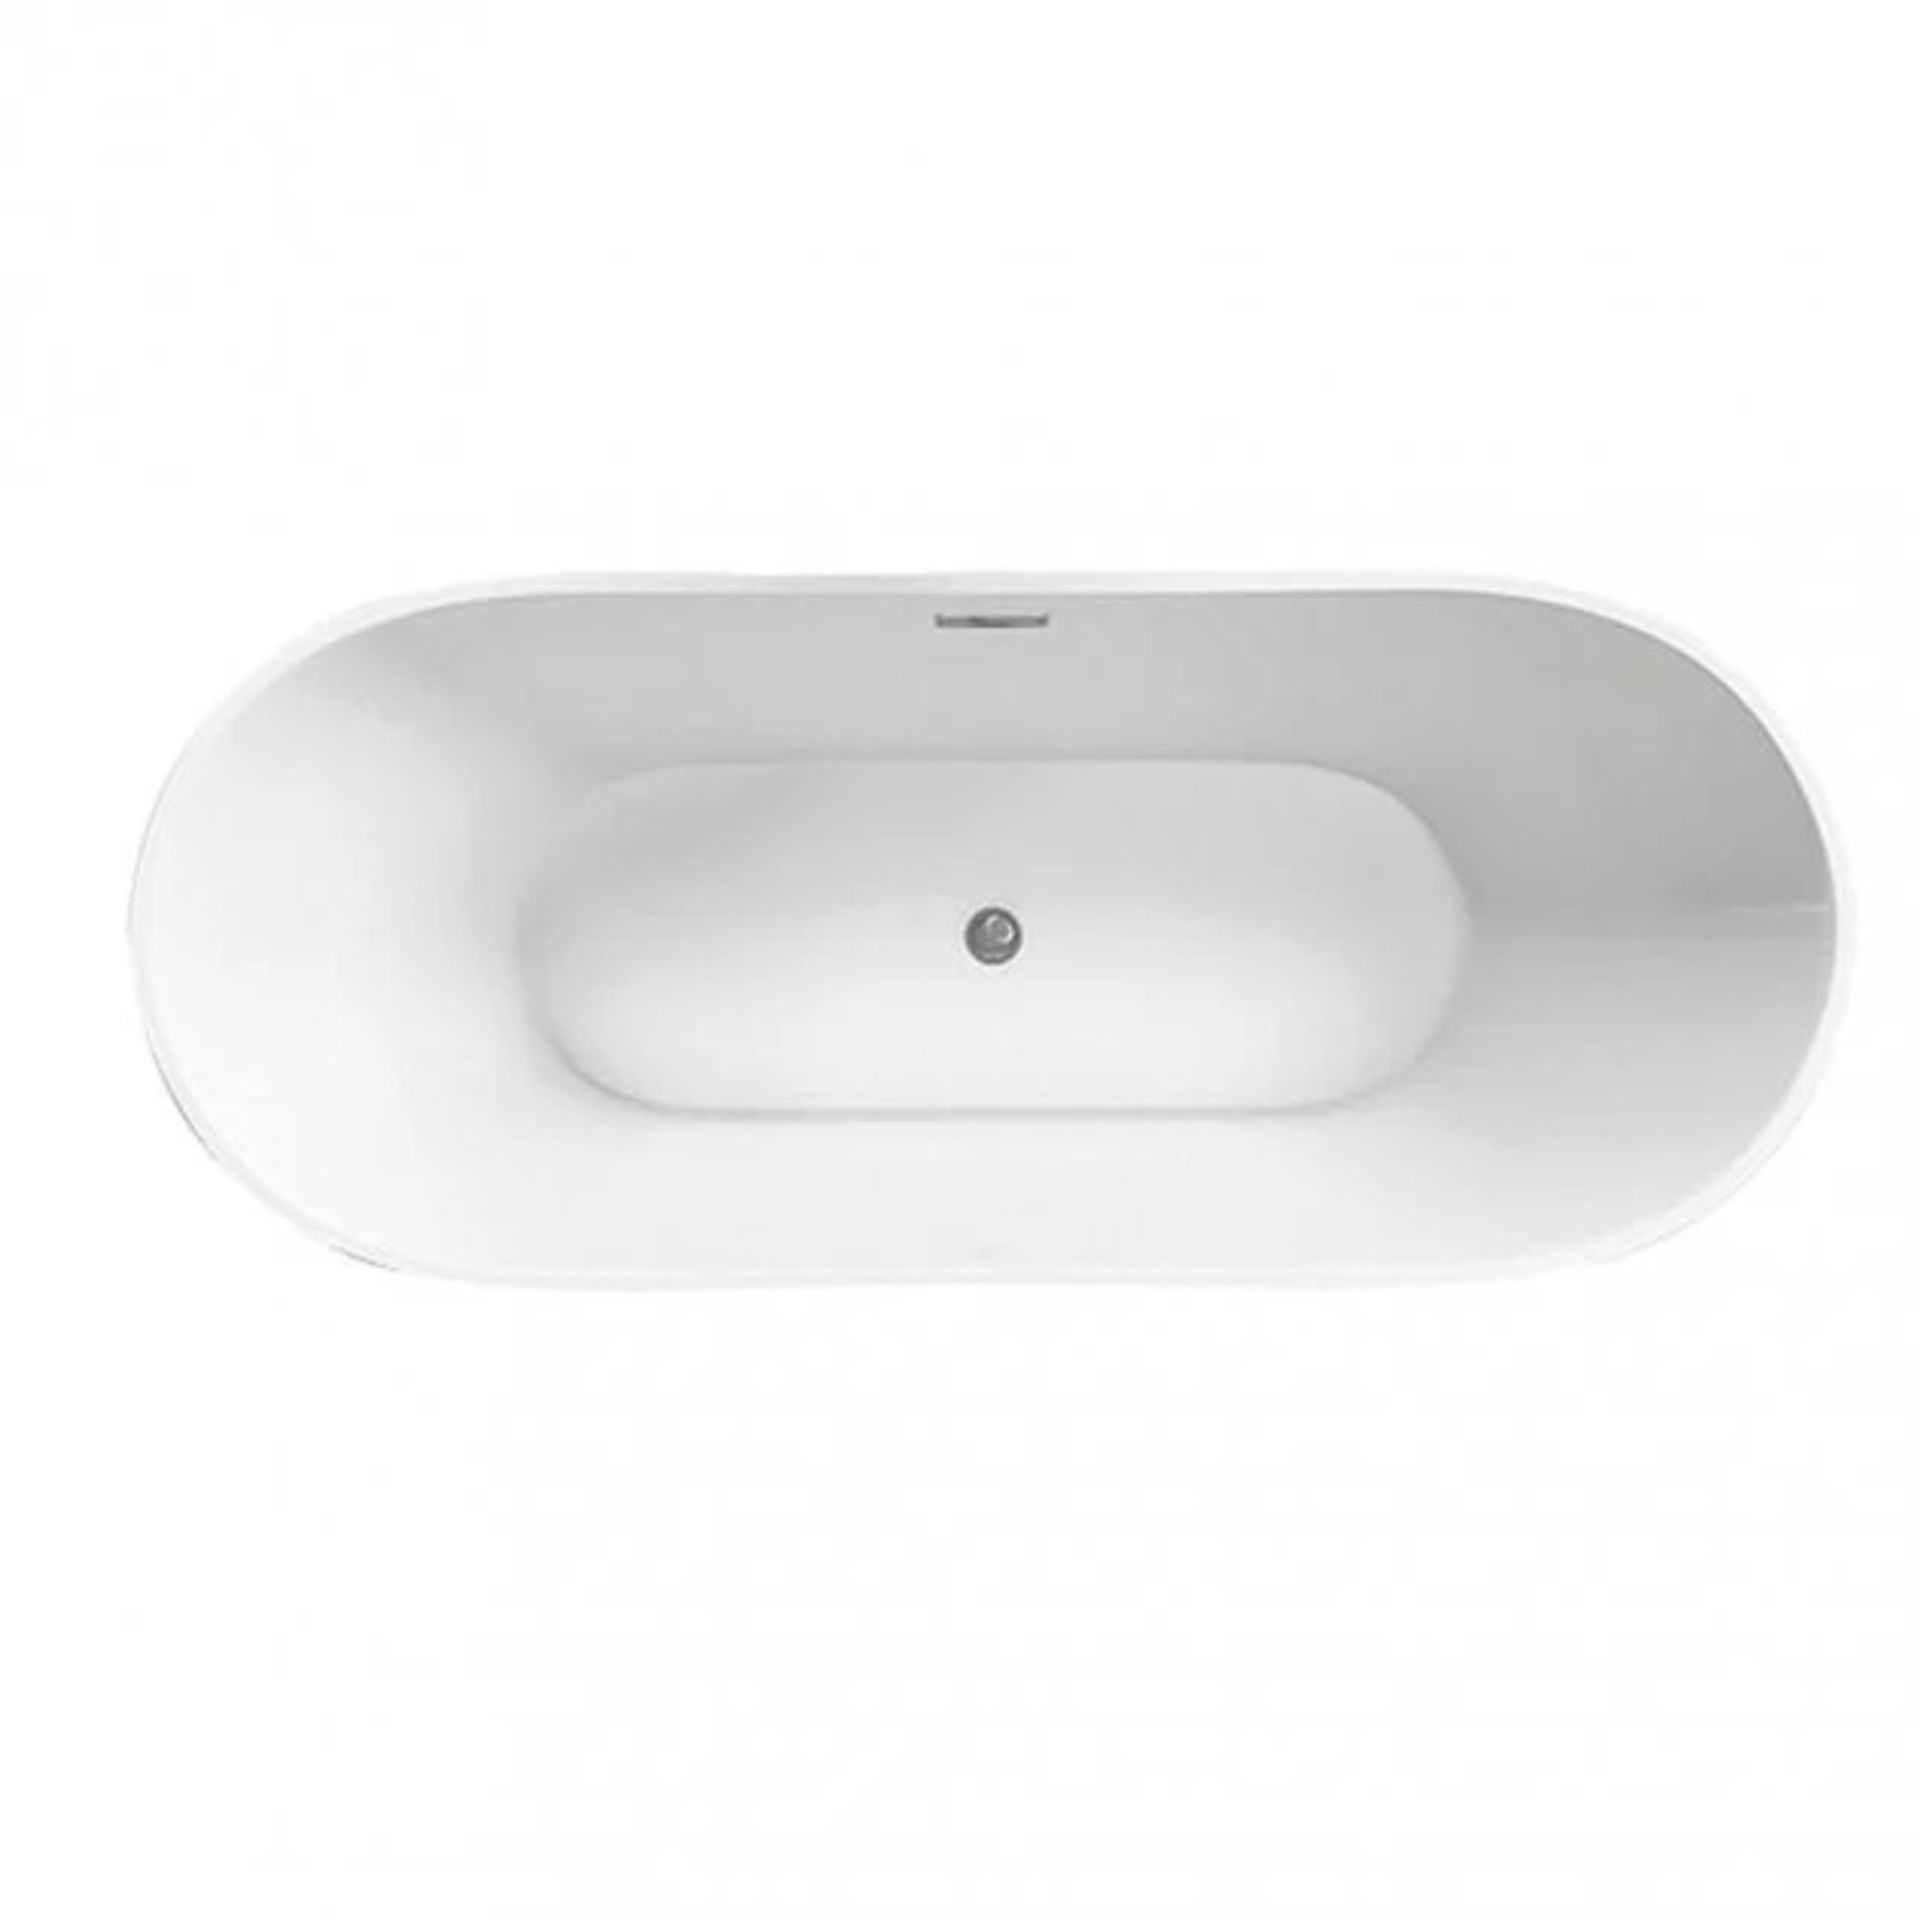 1 x Synergy Lugano 1700mm Freestanding Double Ended Contemporary Bath - New Boxed Stock - RRP £1,320 - Image 2 of 3